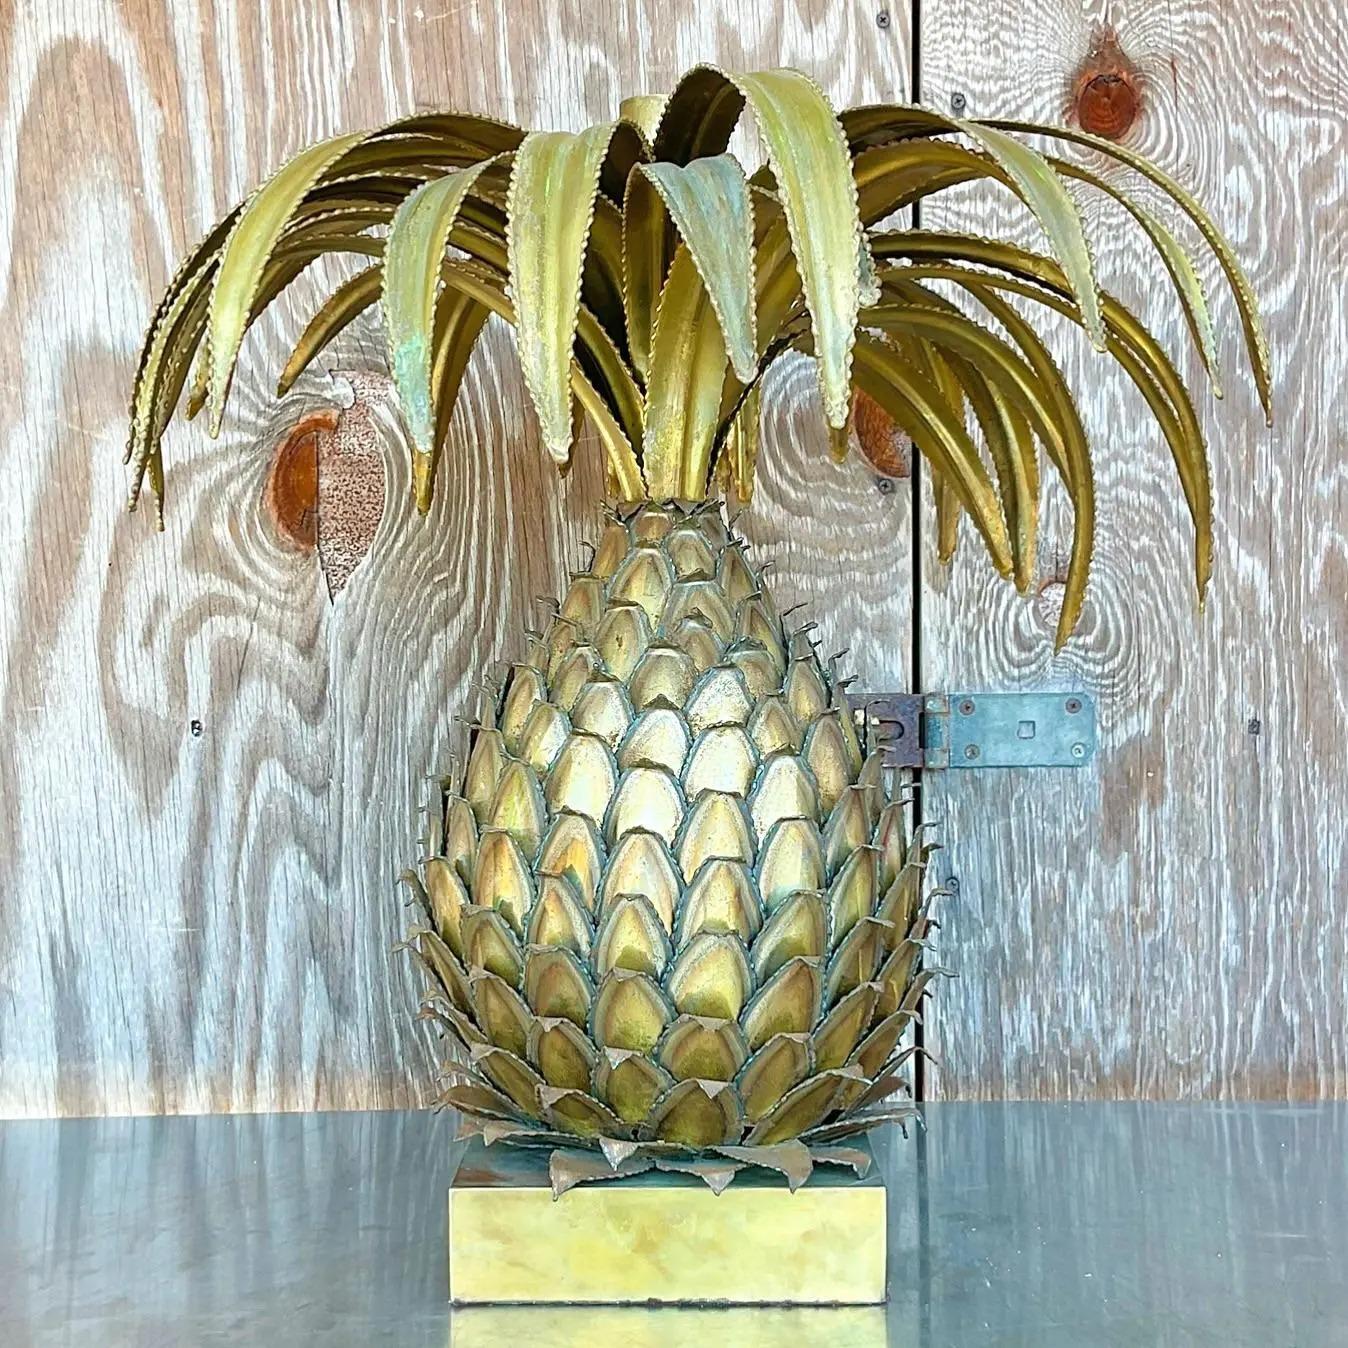 A fabulous vintage Regency table lamp. A chic brass pineapple from Maison Jansen. Gorgeous attention to detail. Acquired from a Palm Beach estate.